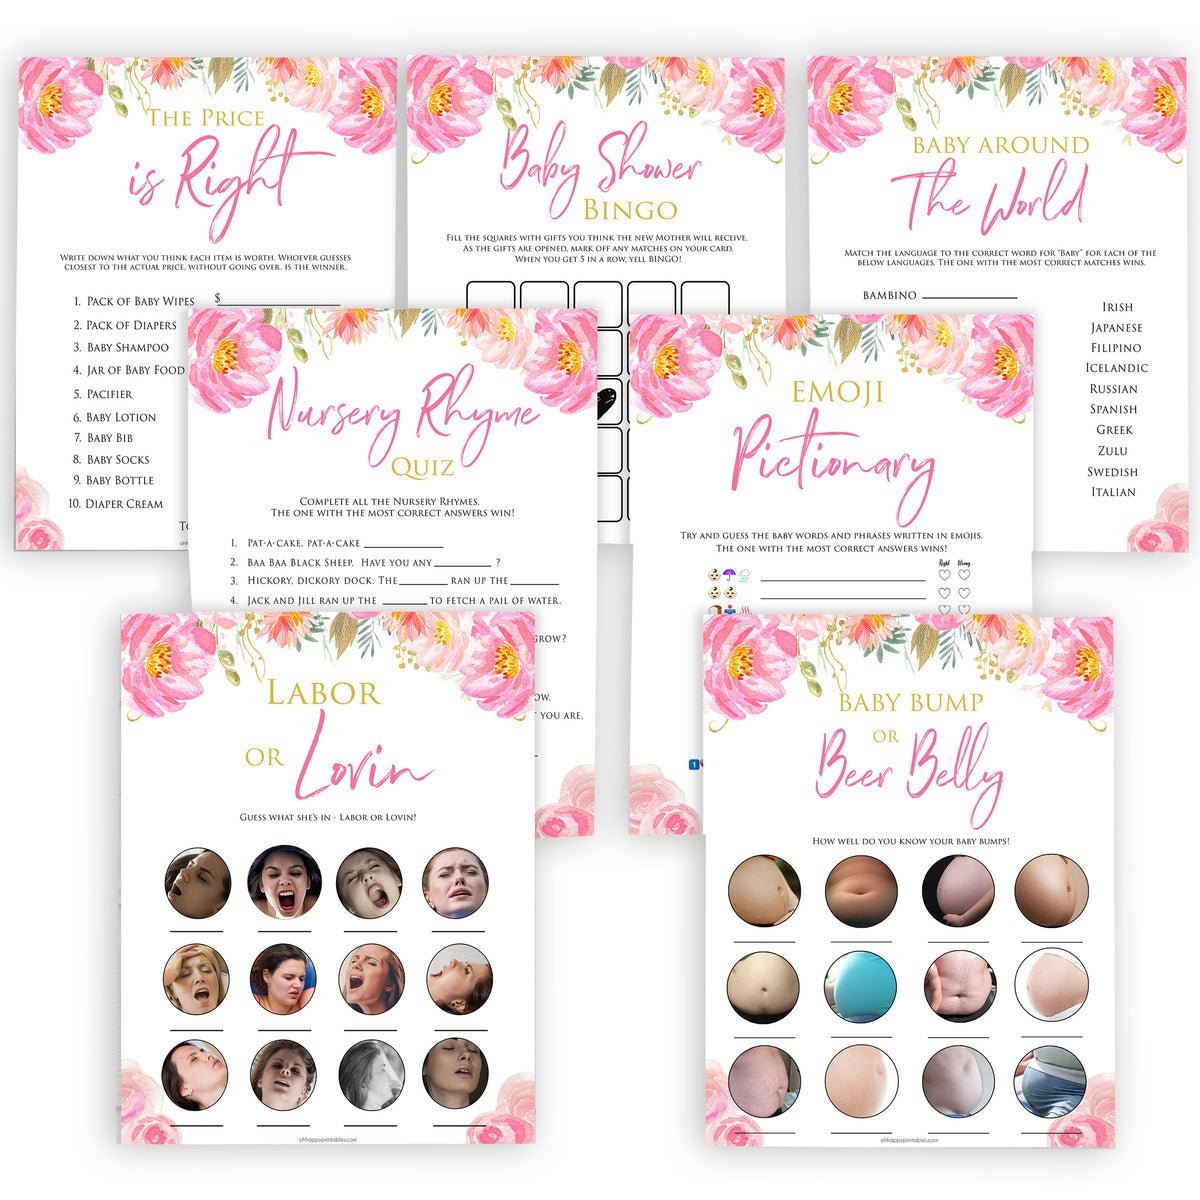 Pink blush floral baby shower games, 7 baby shower games, baby games bundle, printable baby games, baby shower games, blush baby shower, floral baby games, girl baby shower ideas, pink baby shower ideas, floral baby games, popular baby games, fun baby games